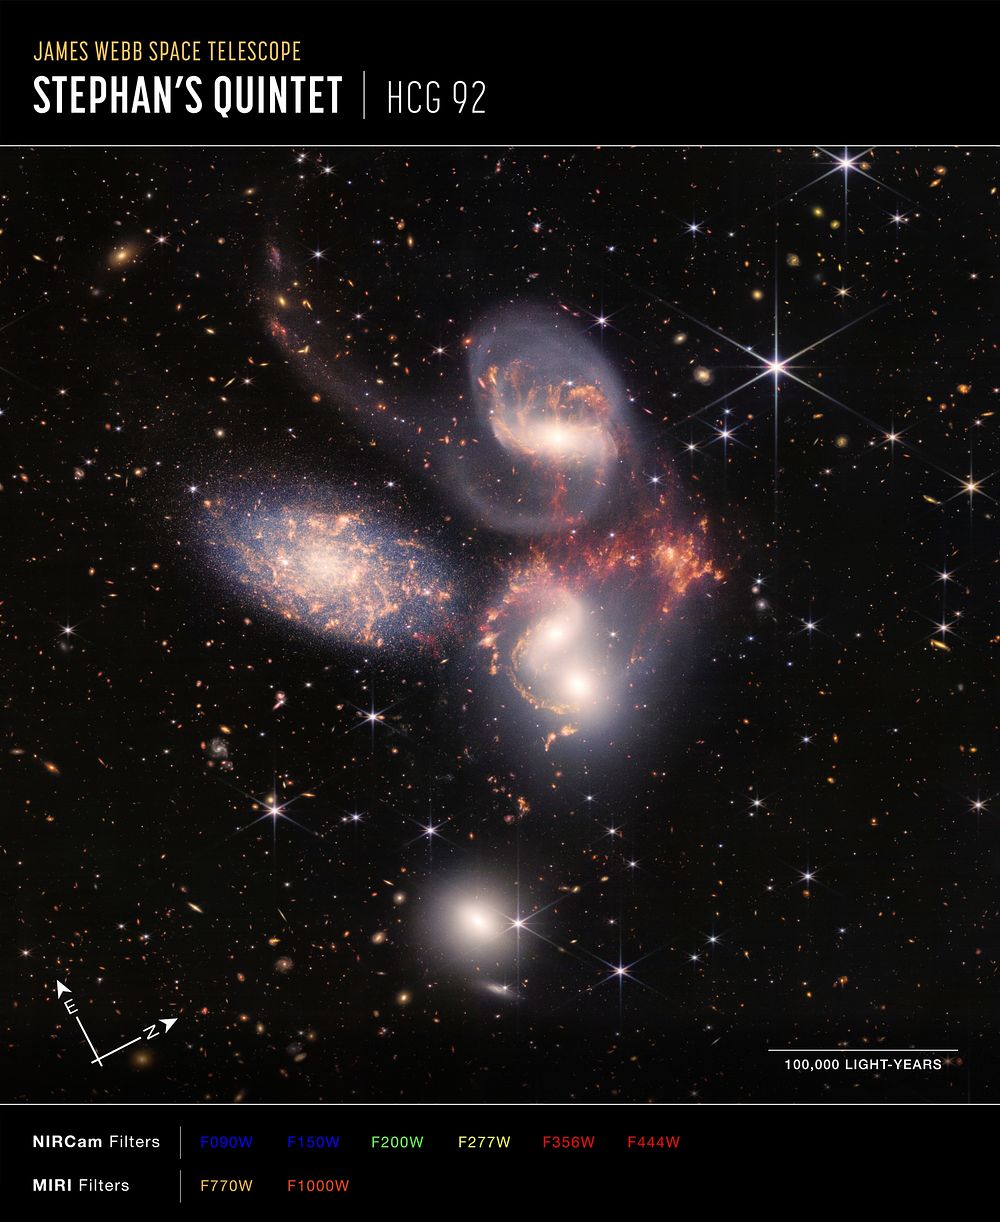 Stephan's Quintet (NIRCam and MIRI Composite Compass Image) from NASA&rsquo;s James Webb Space Telescope